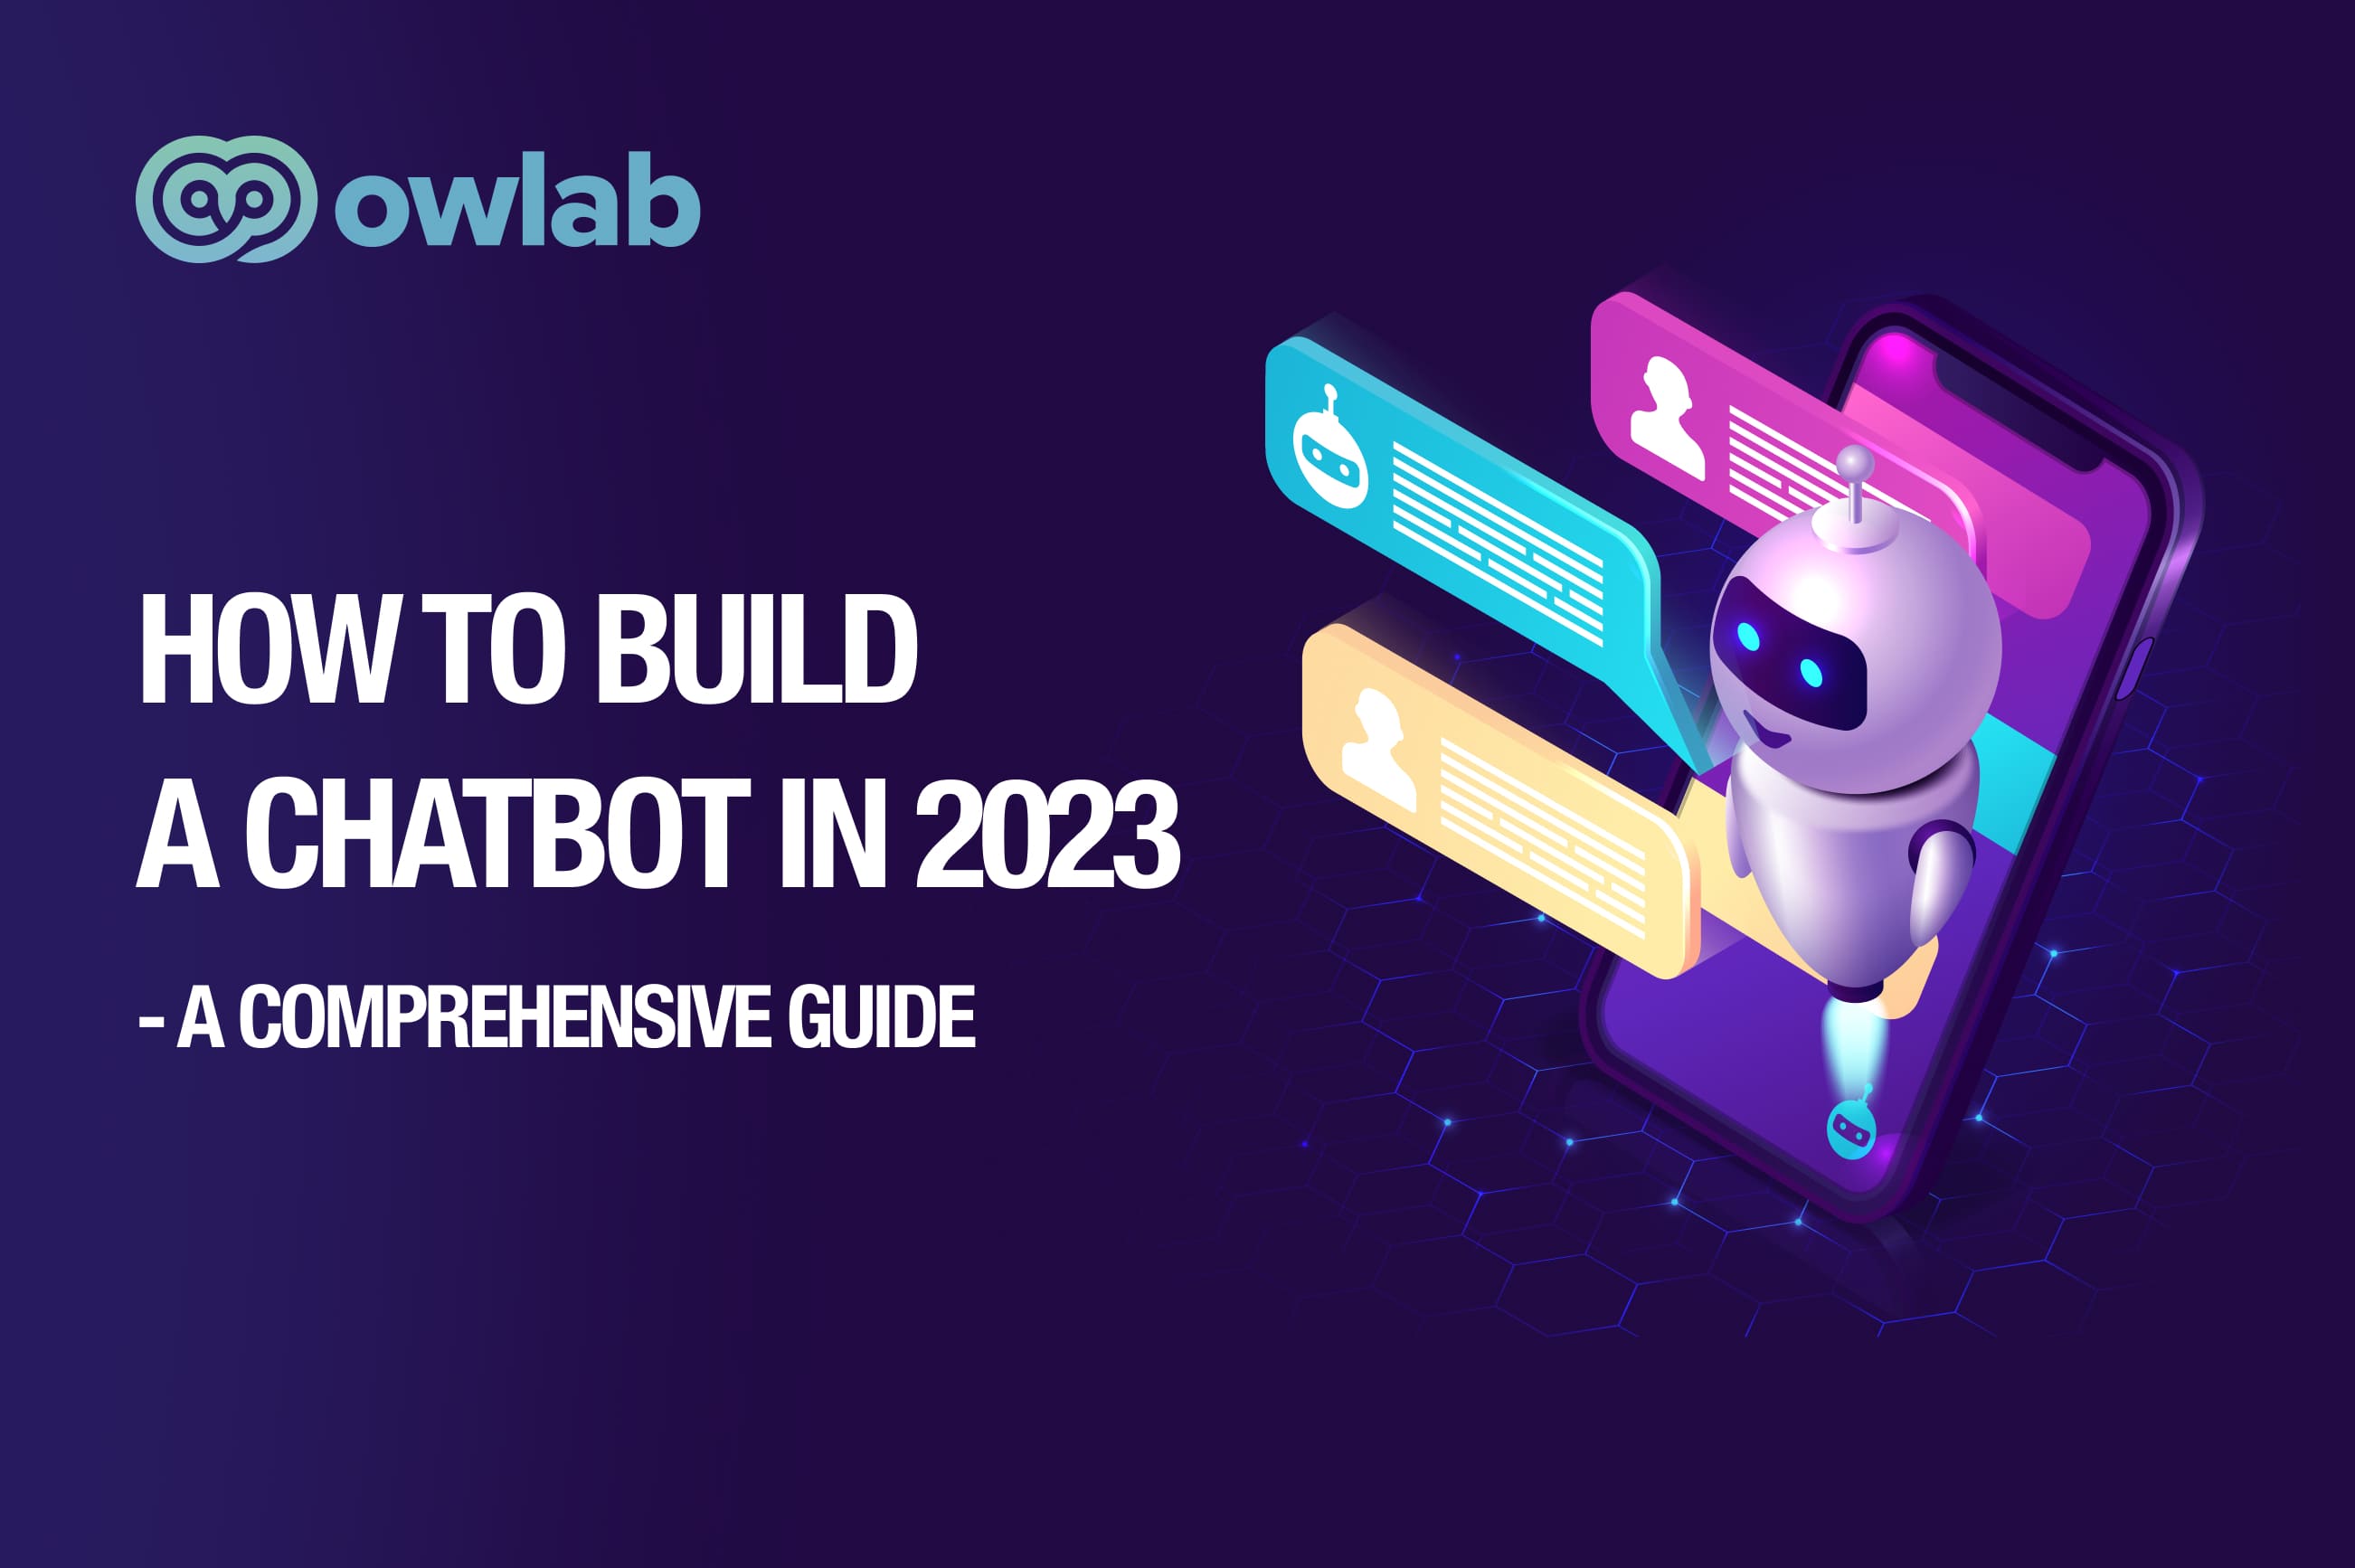 How to Build a Chatbot in 2023 - A Comprehensive Guide